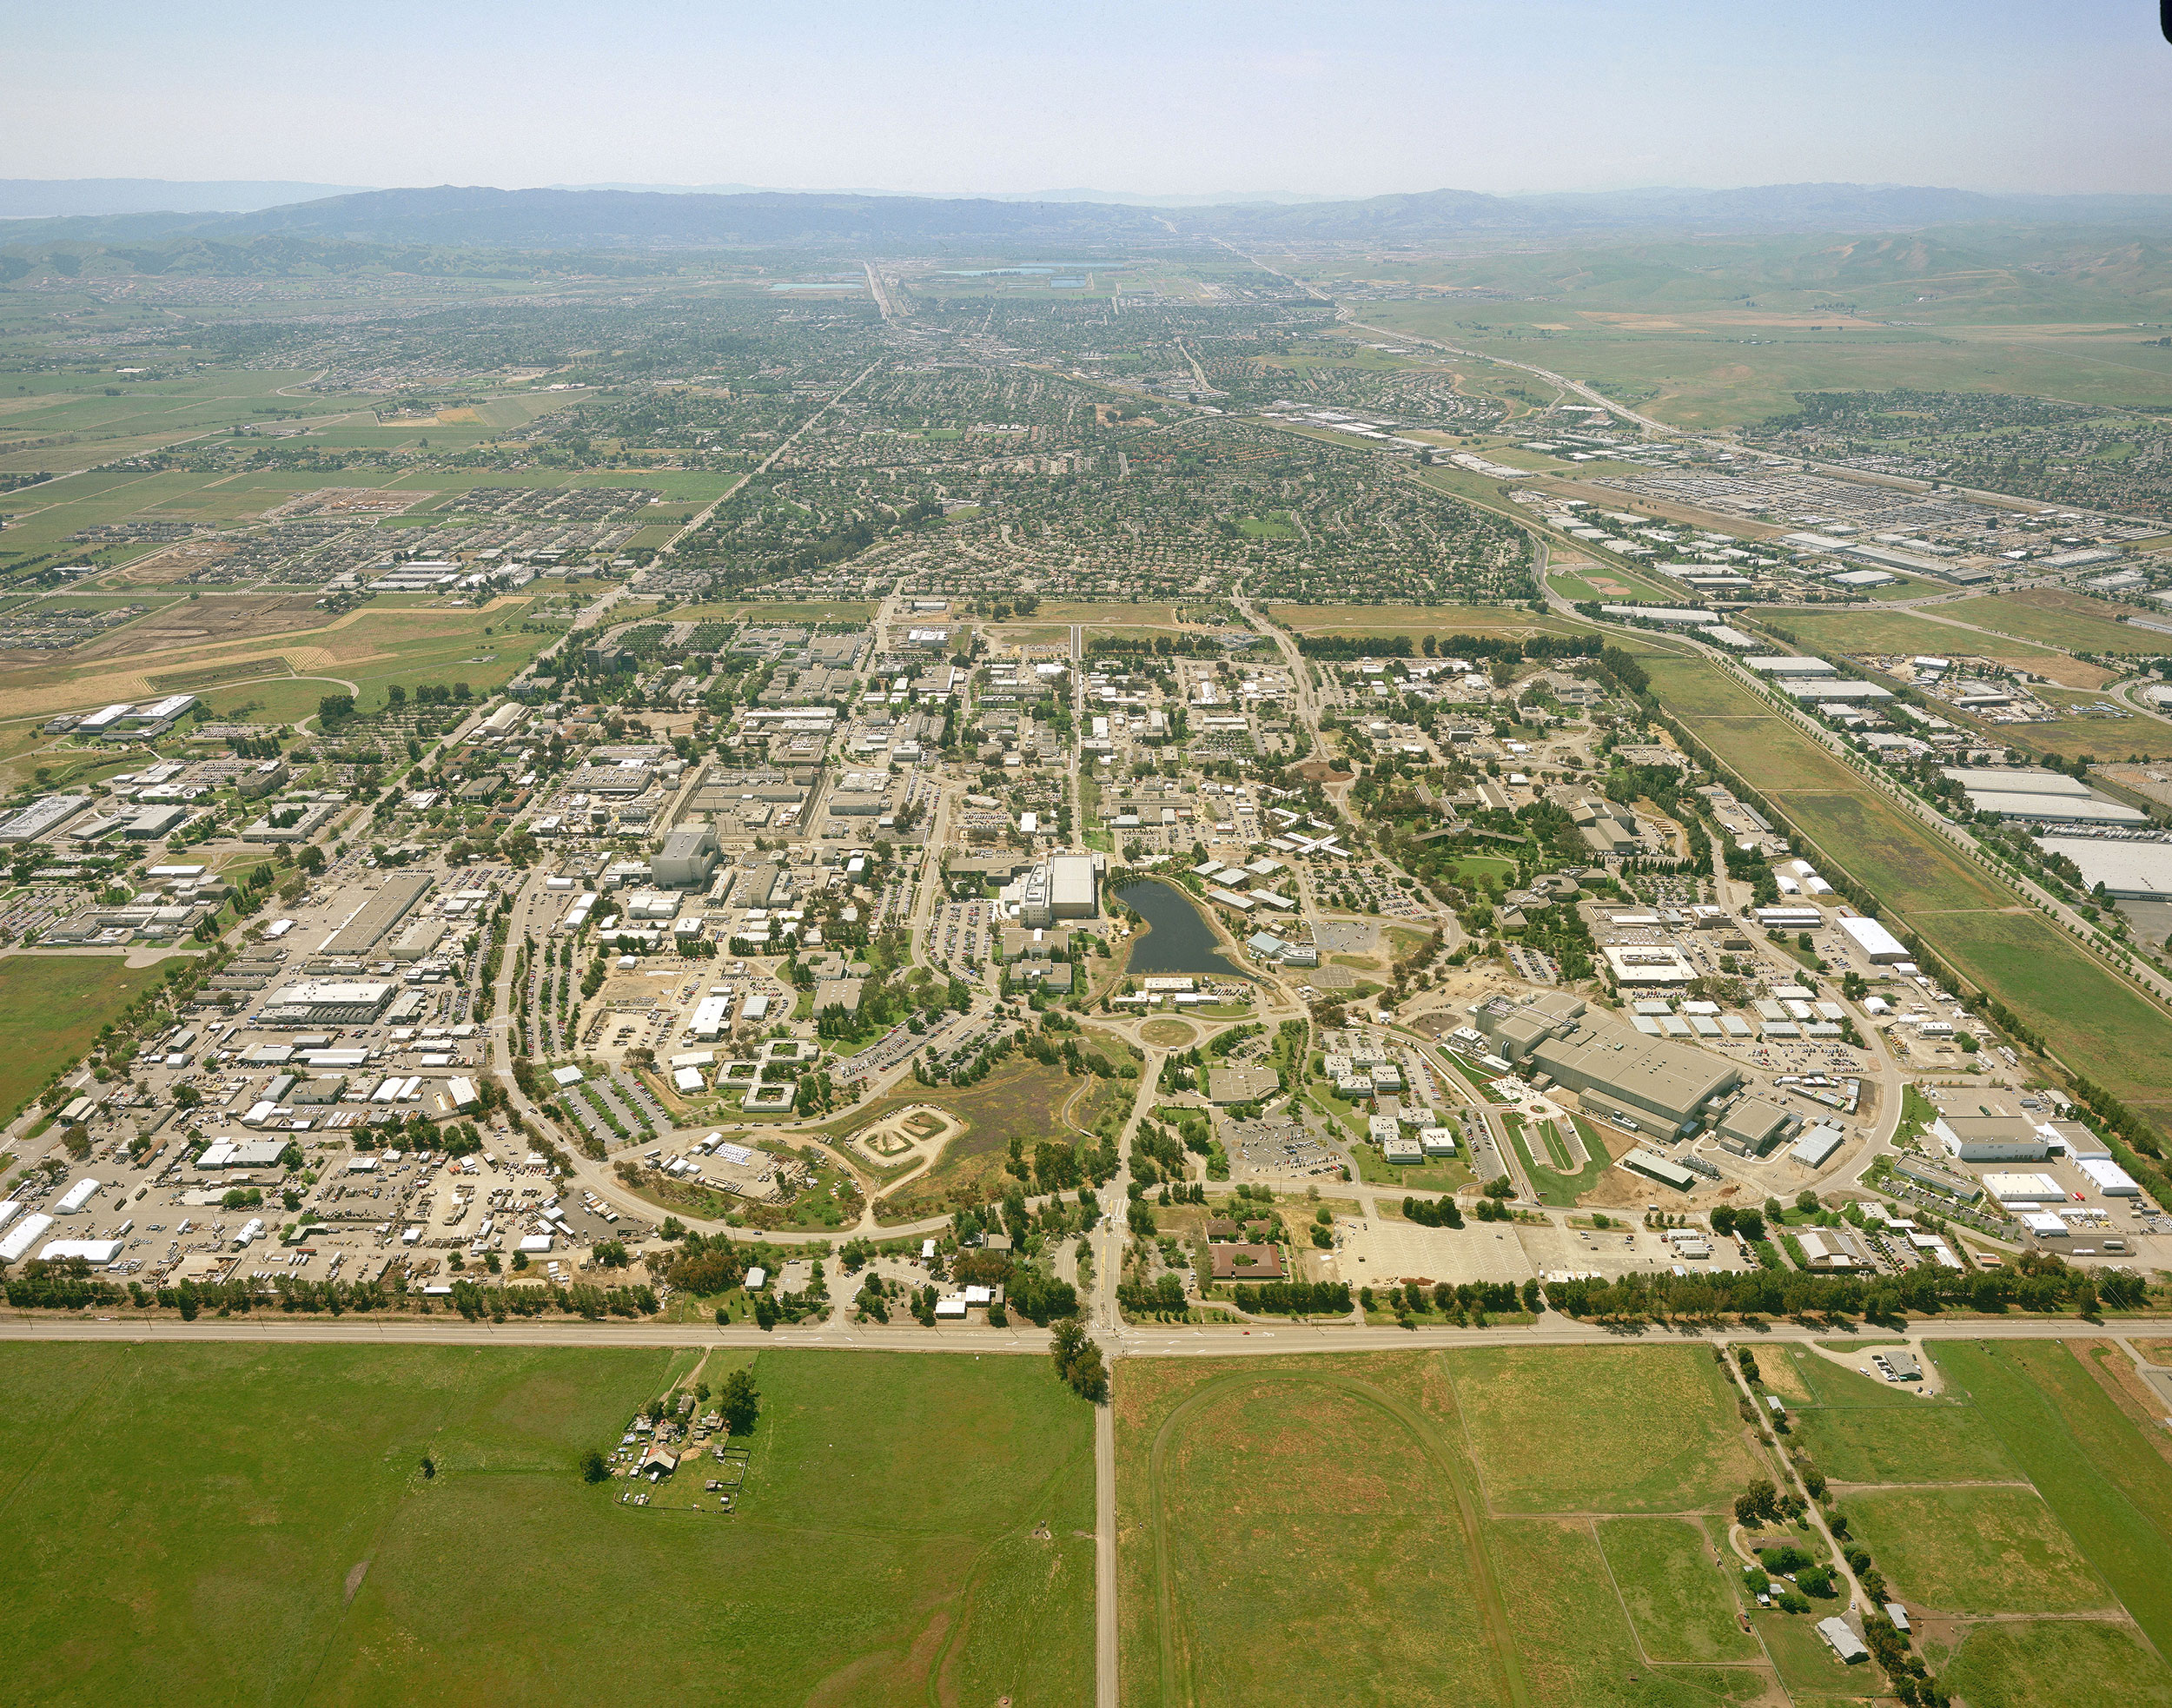 An aerial photo shows the Lawrence Livermore National Laboratory in California, where scientists have successfully produced a nuclear fusion reaction resulting in a net energy gain, a source tells CNN.